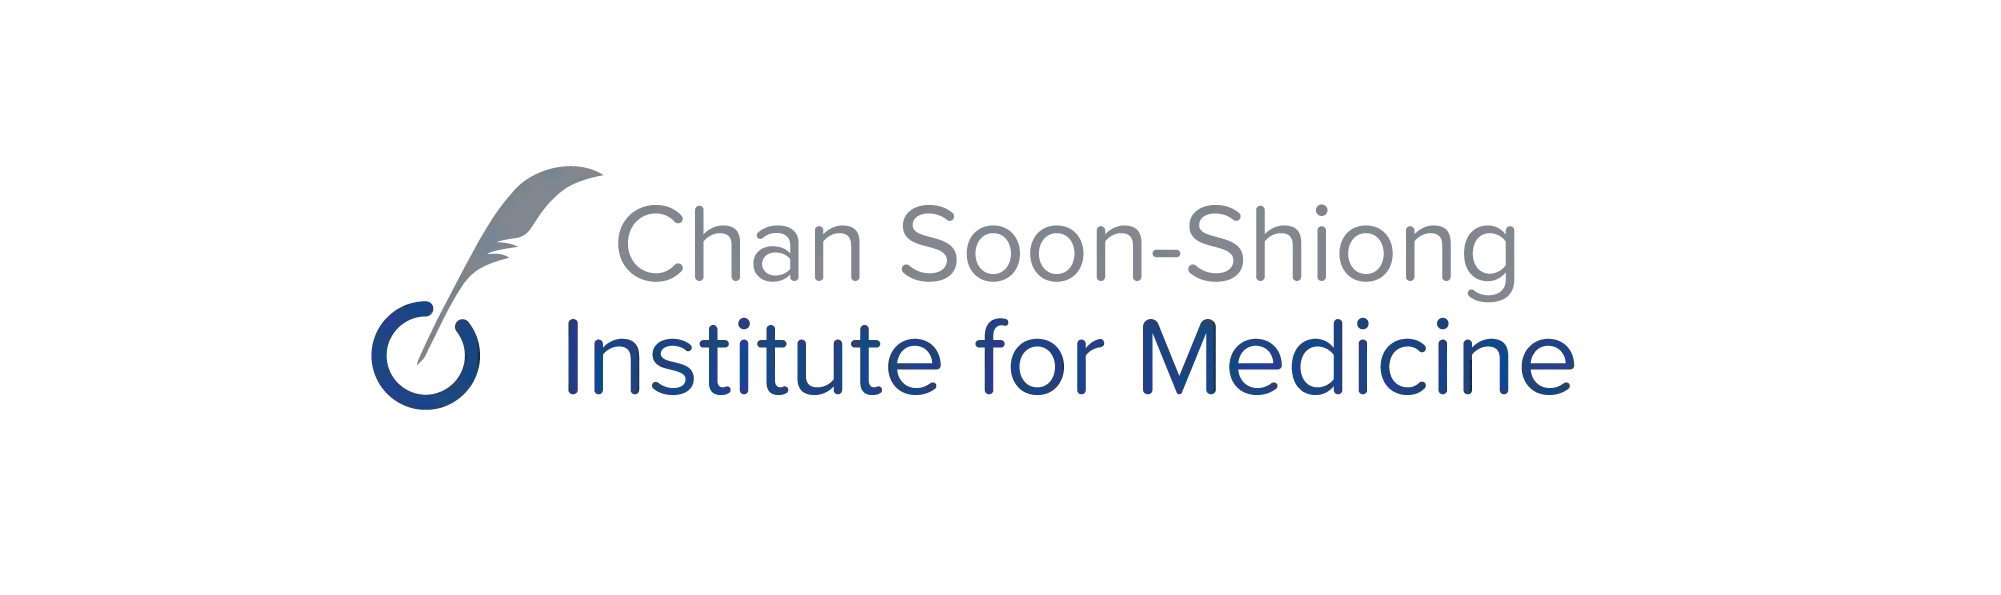 Chan Soon-Shiong Institute for Medicine (CSSIFM)